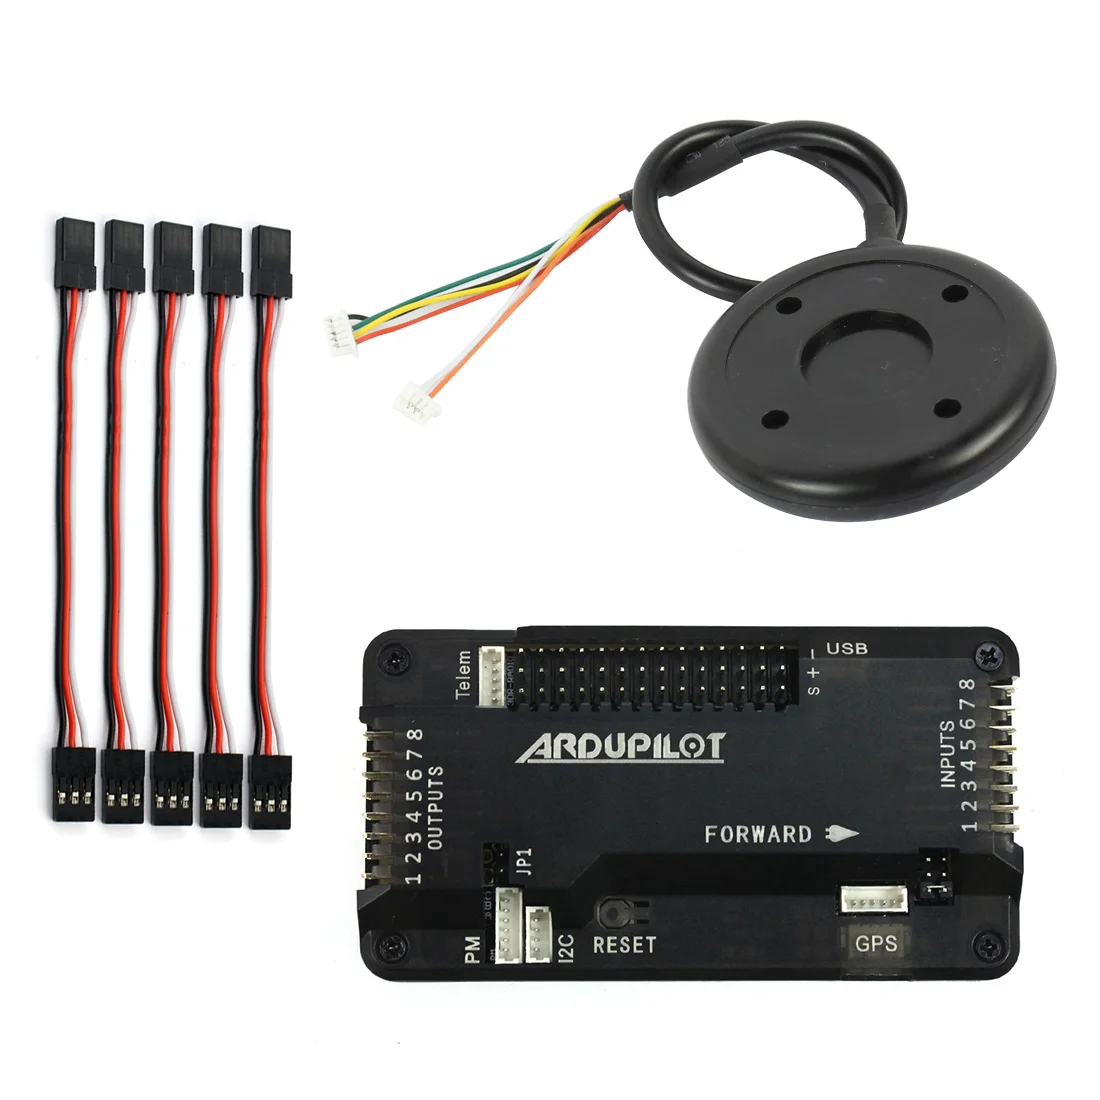 

APM2.8 APM 2.8 RC Multicopter Flight Controller Board with Case 6M GPS Compass for DIY FPV RC Drone Multirotor FS